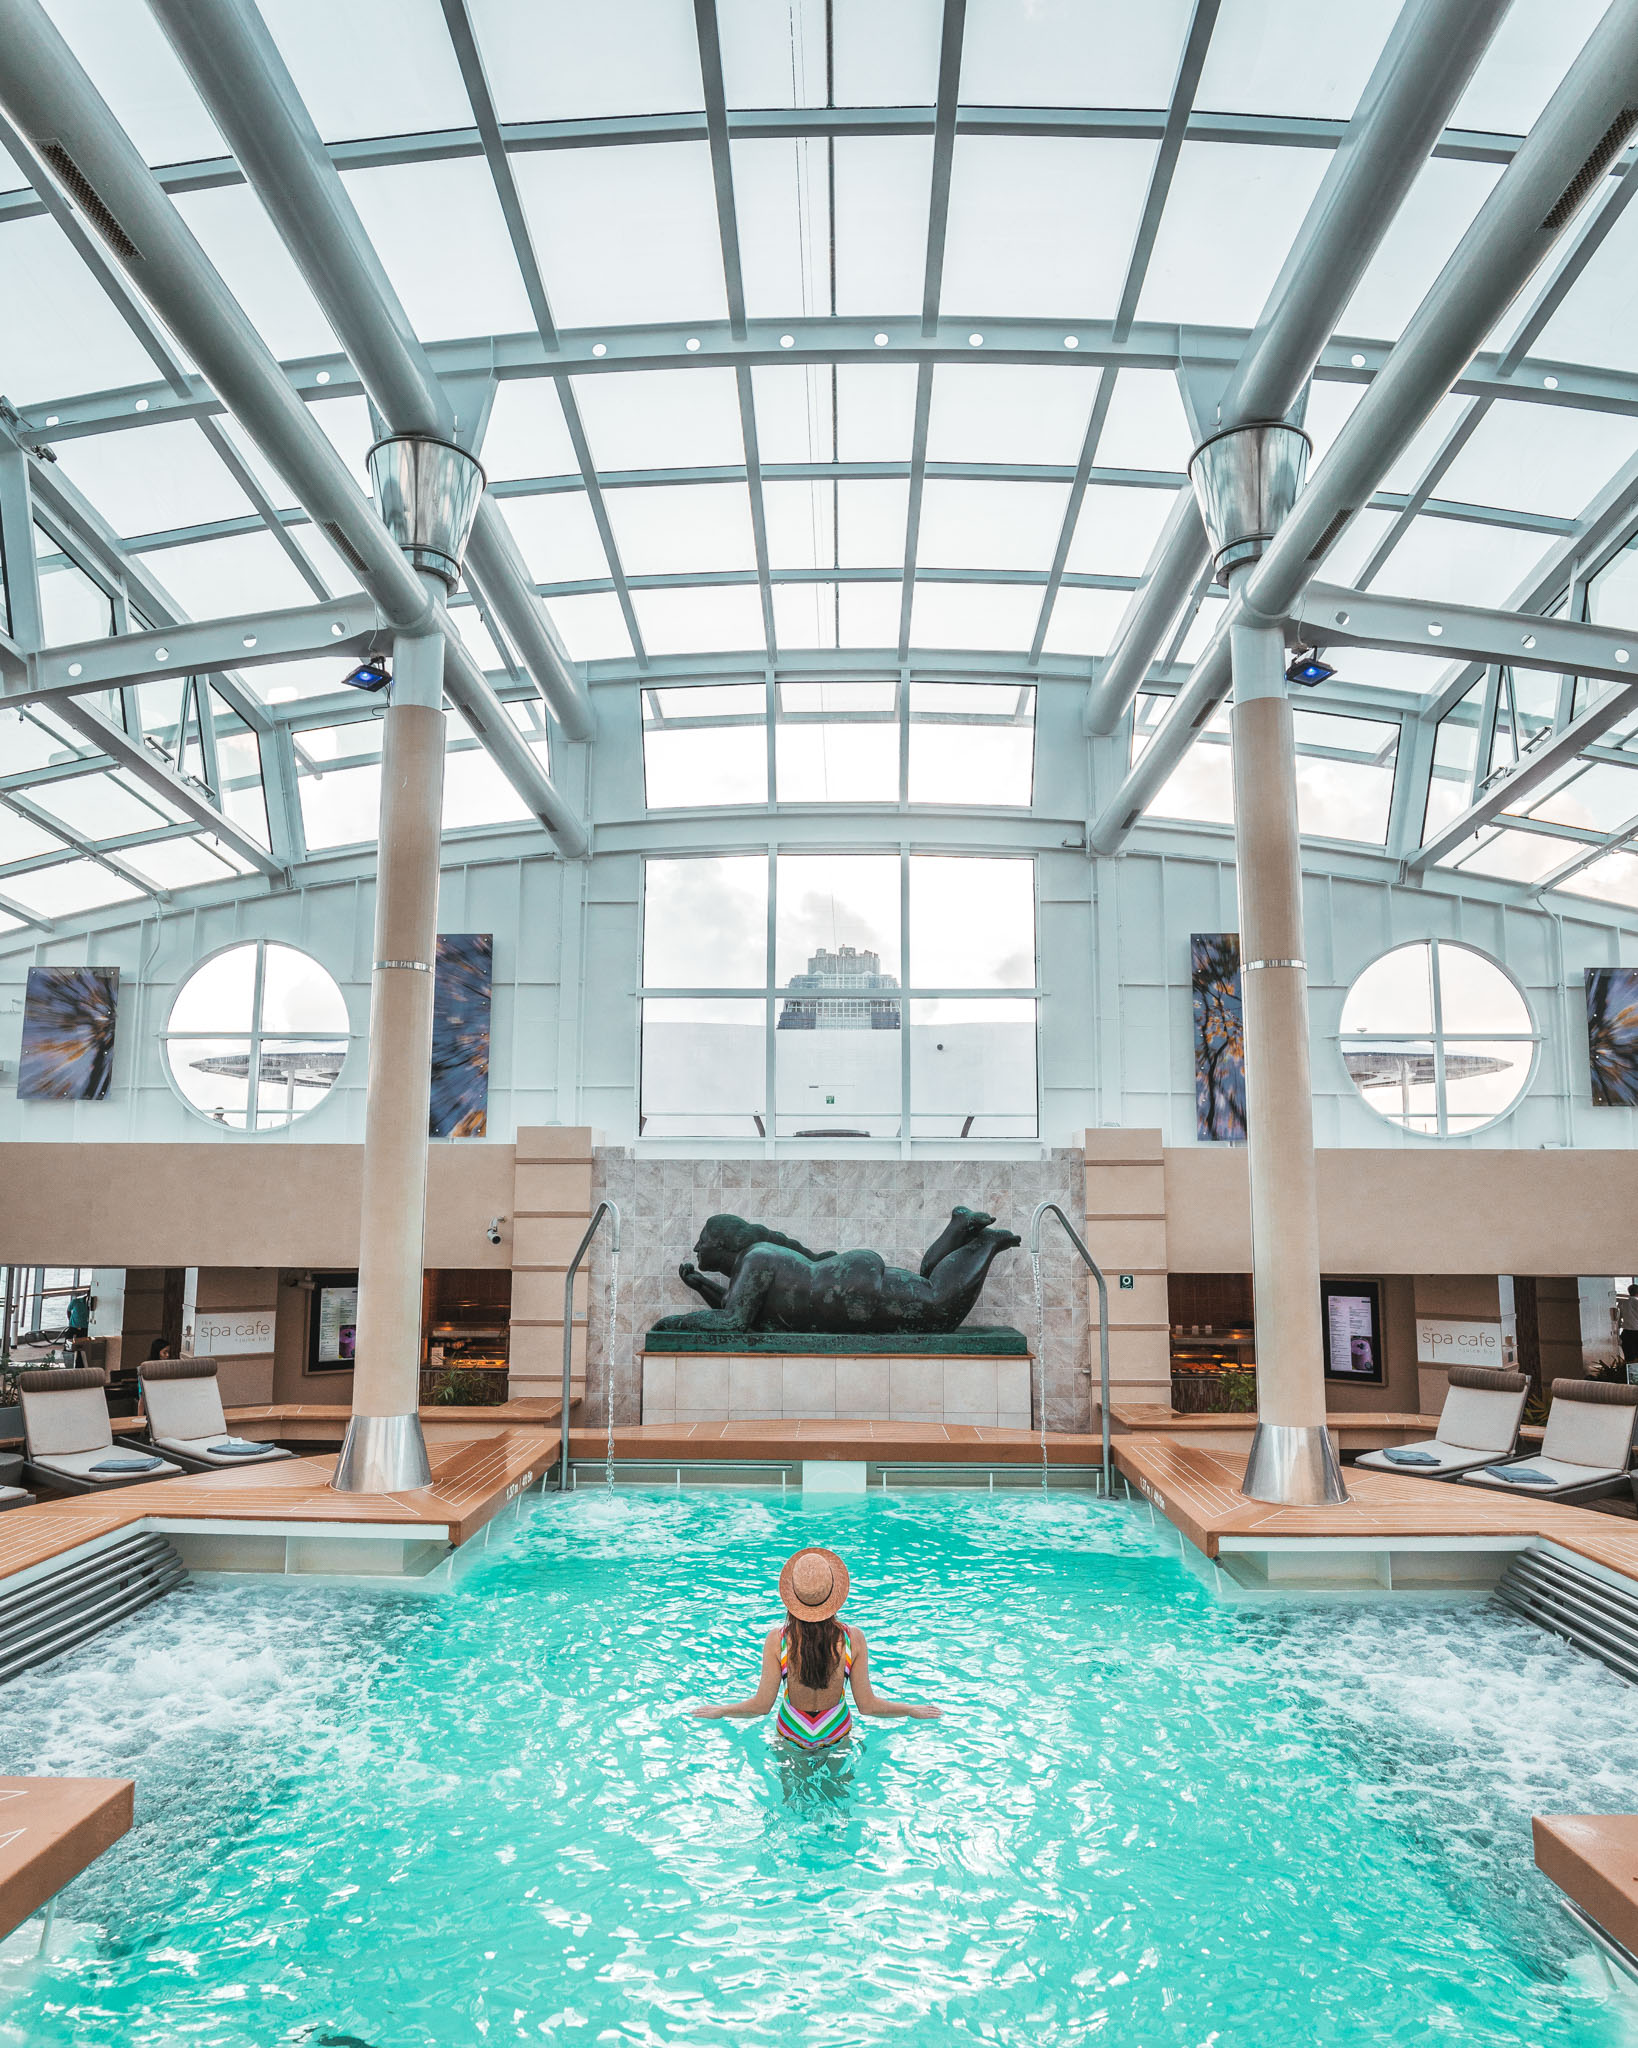 The indoor Solarium Pool onboard the Celebrity Summit cruise ship